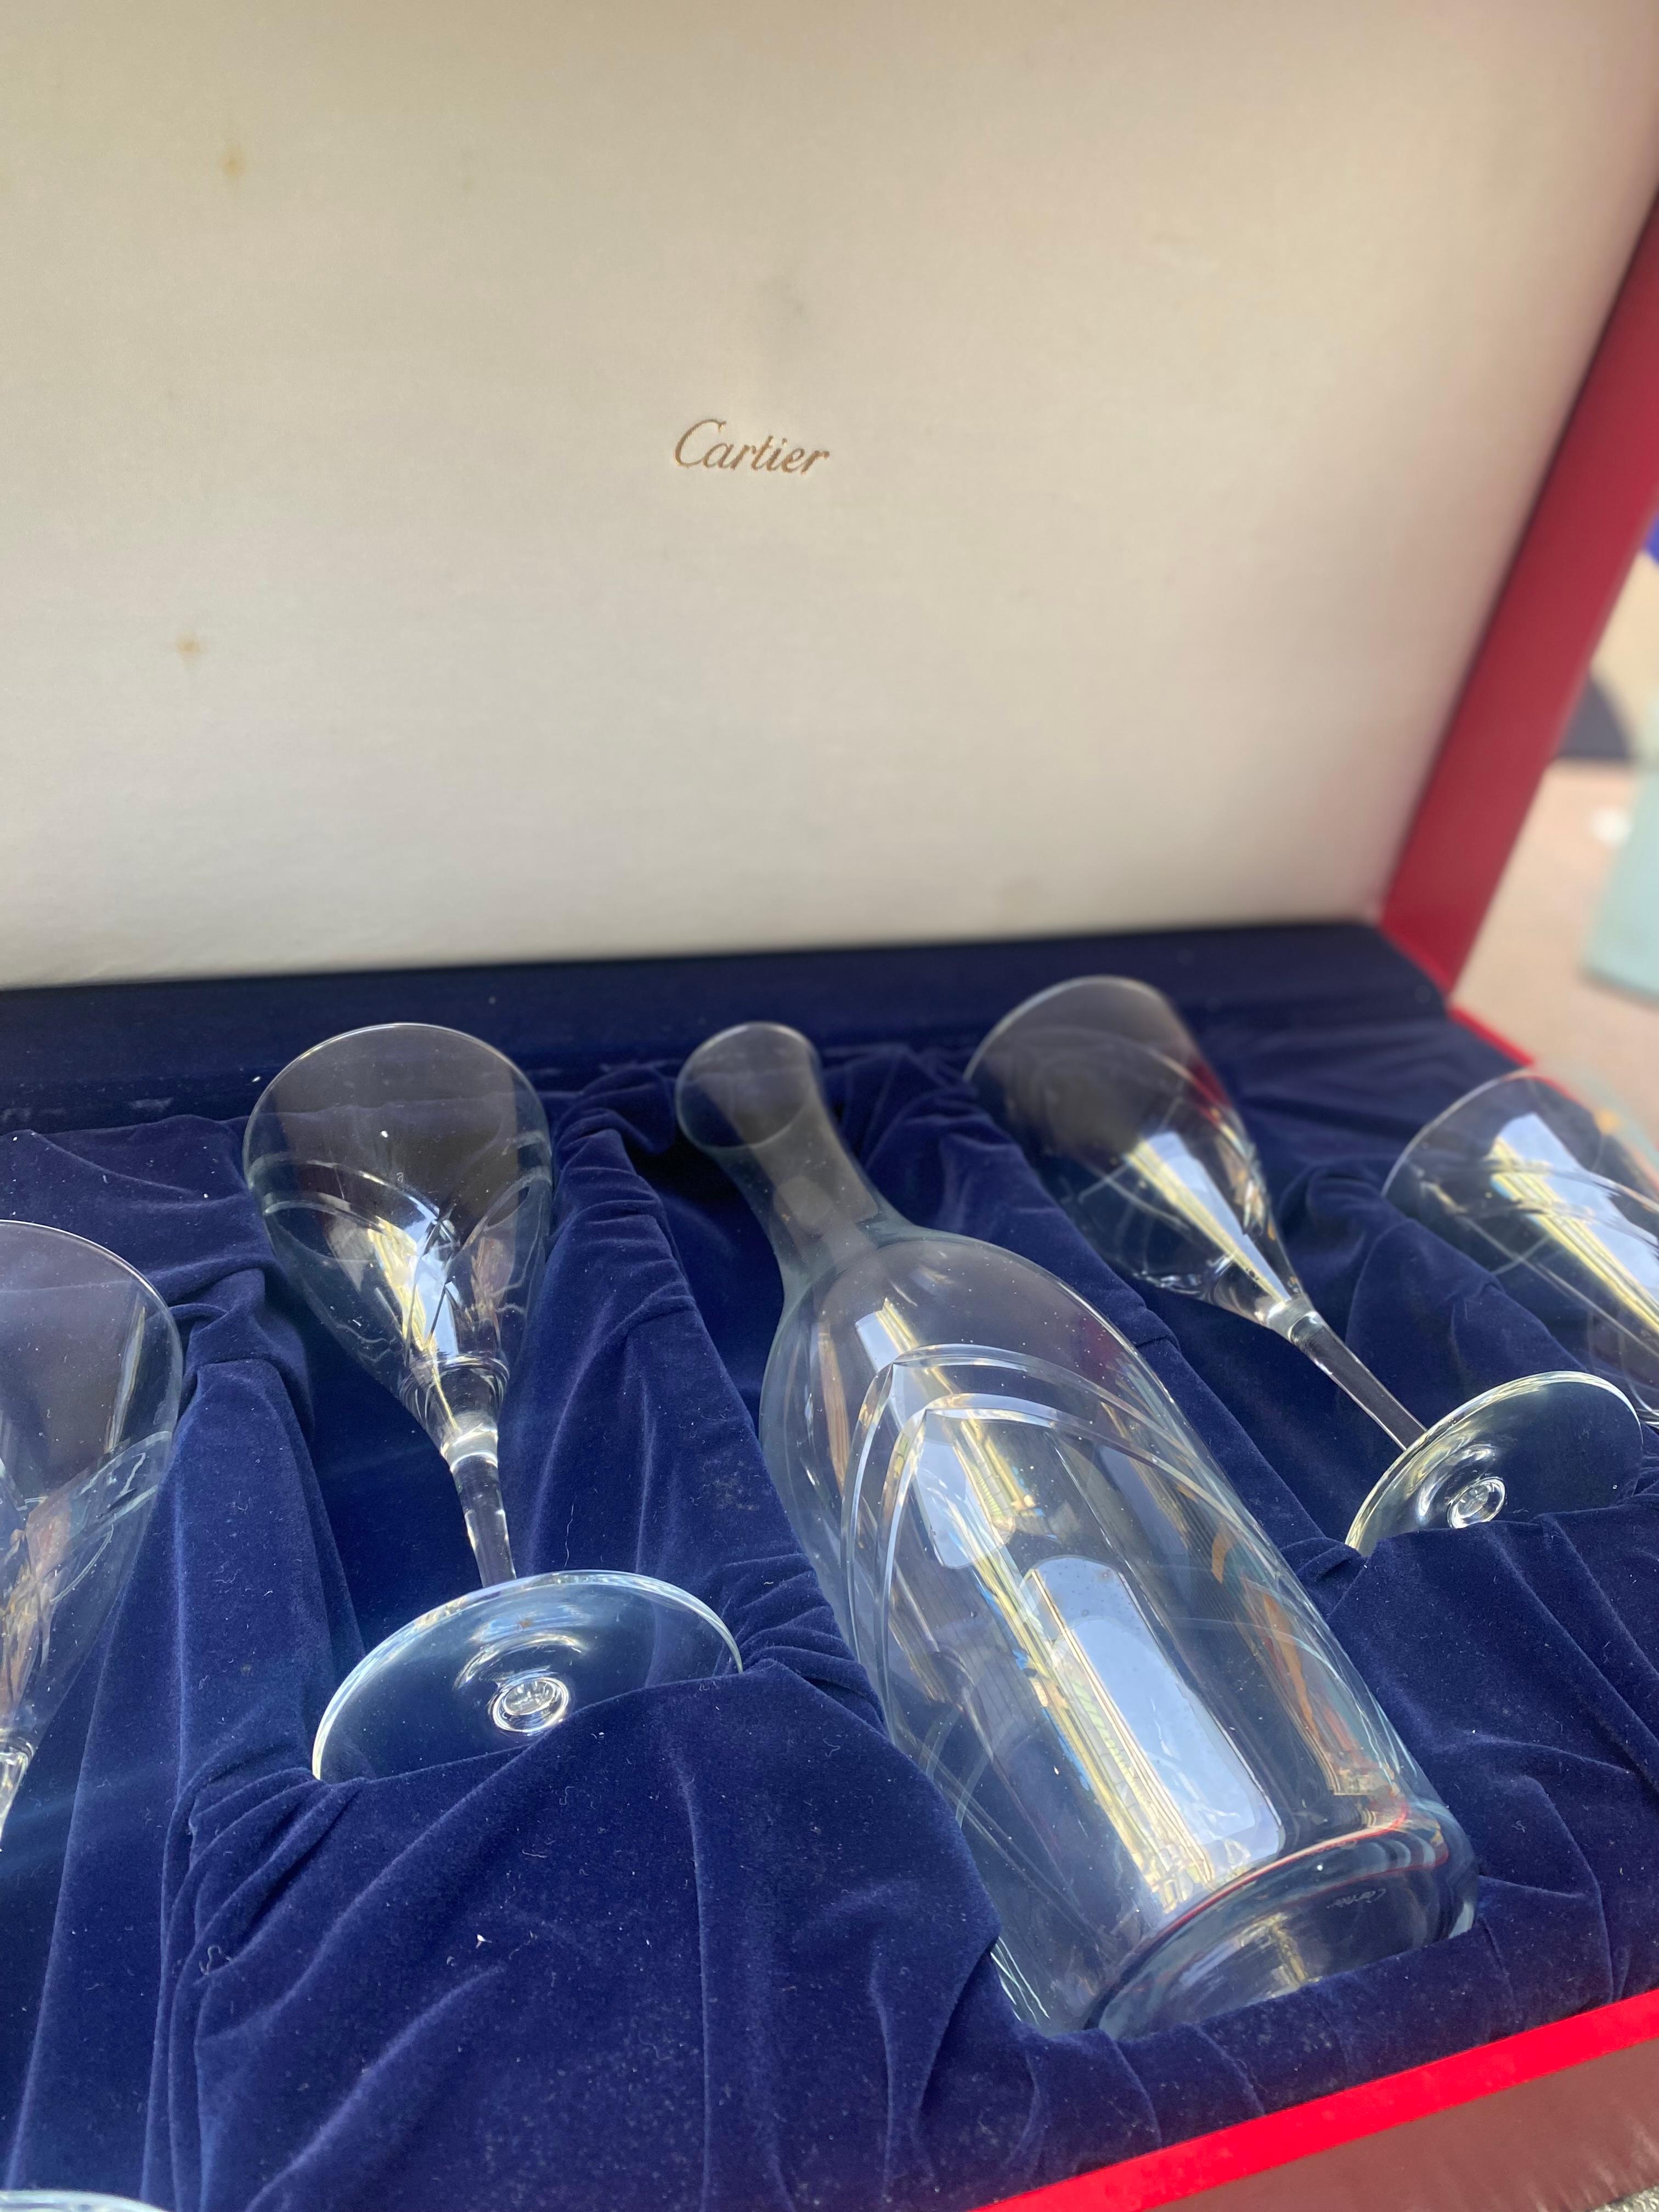 Cartier Box Consisting of 4 Water Glasses and a Crystal Water Carafe - 1960s For Sale 2